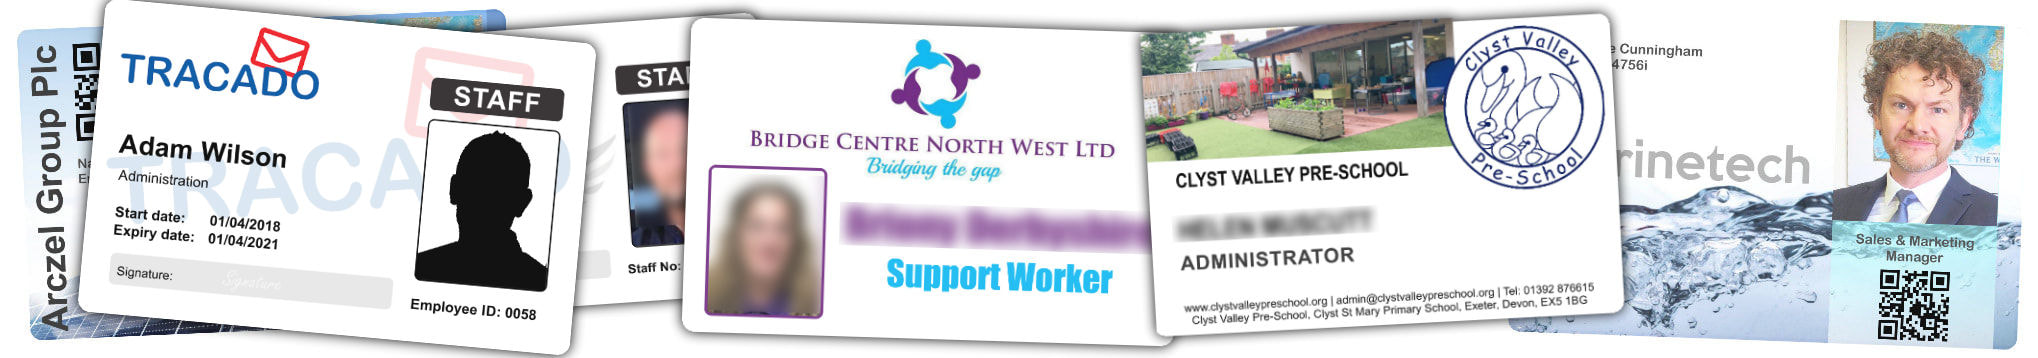 Slough examples of staff photo ID cards | samples of employee Identity card printing | Workers ID cards printed in 